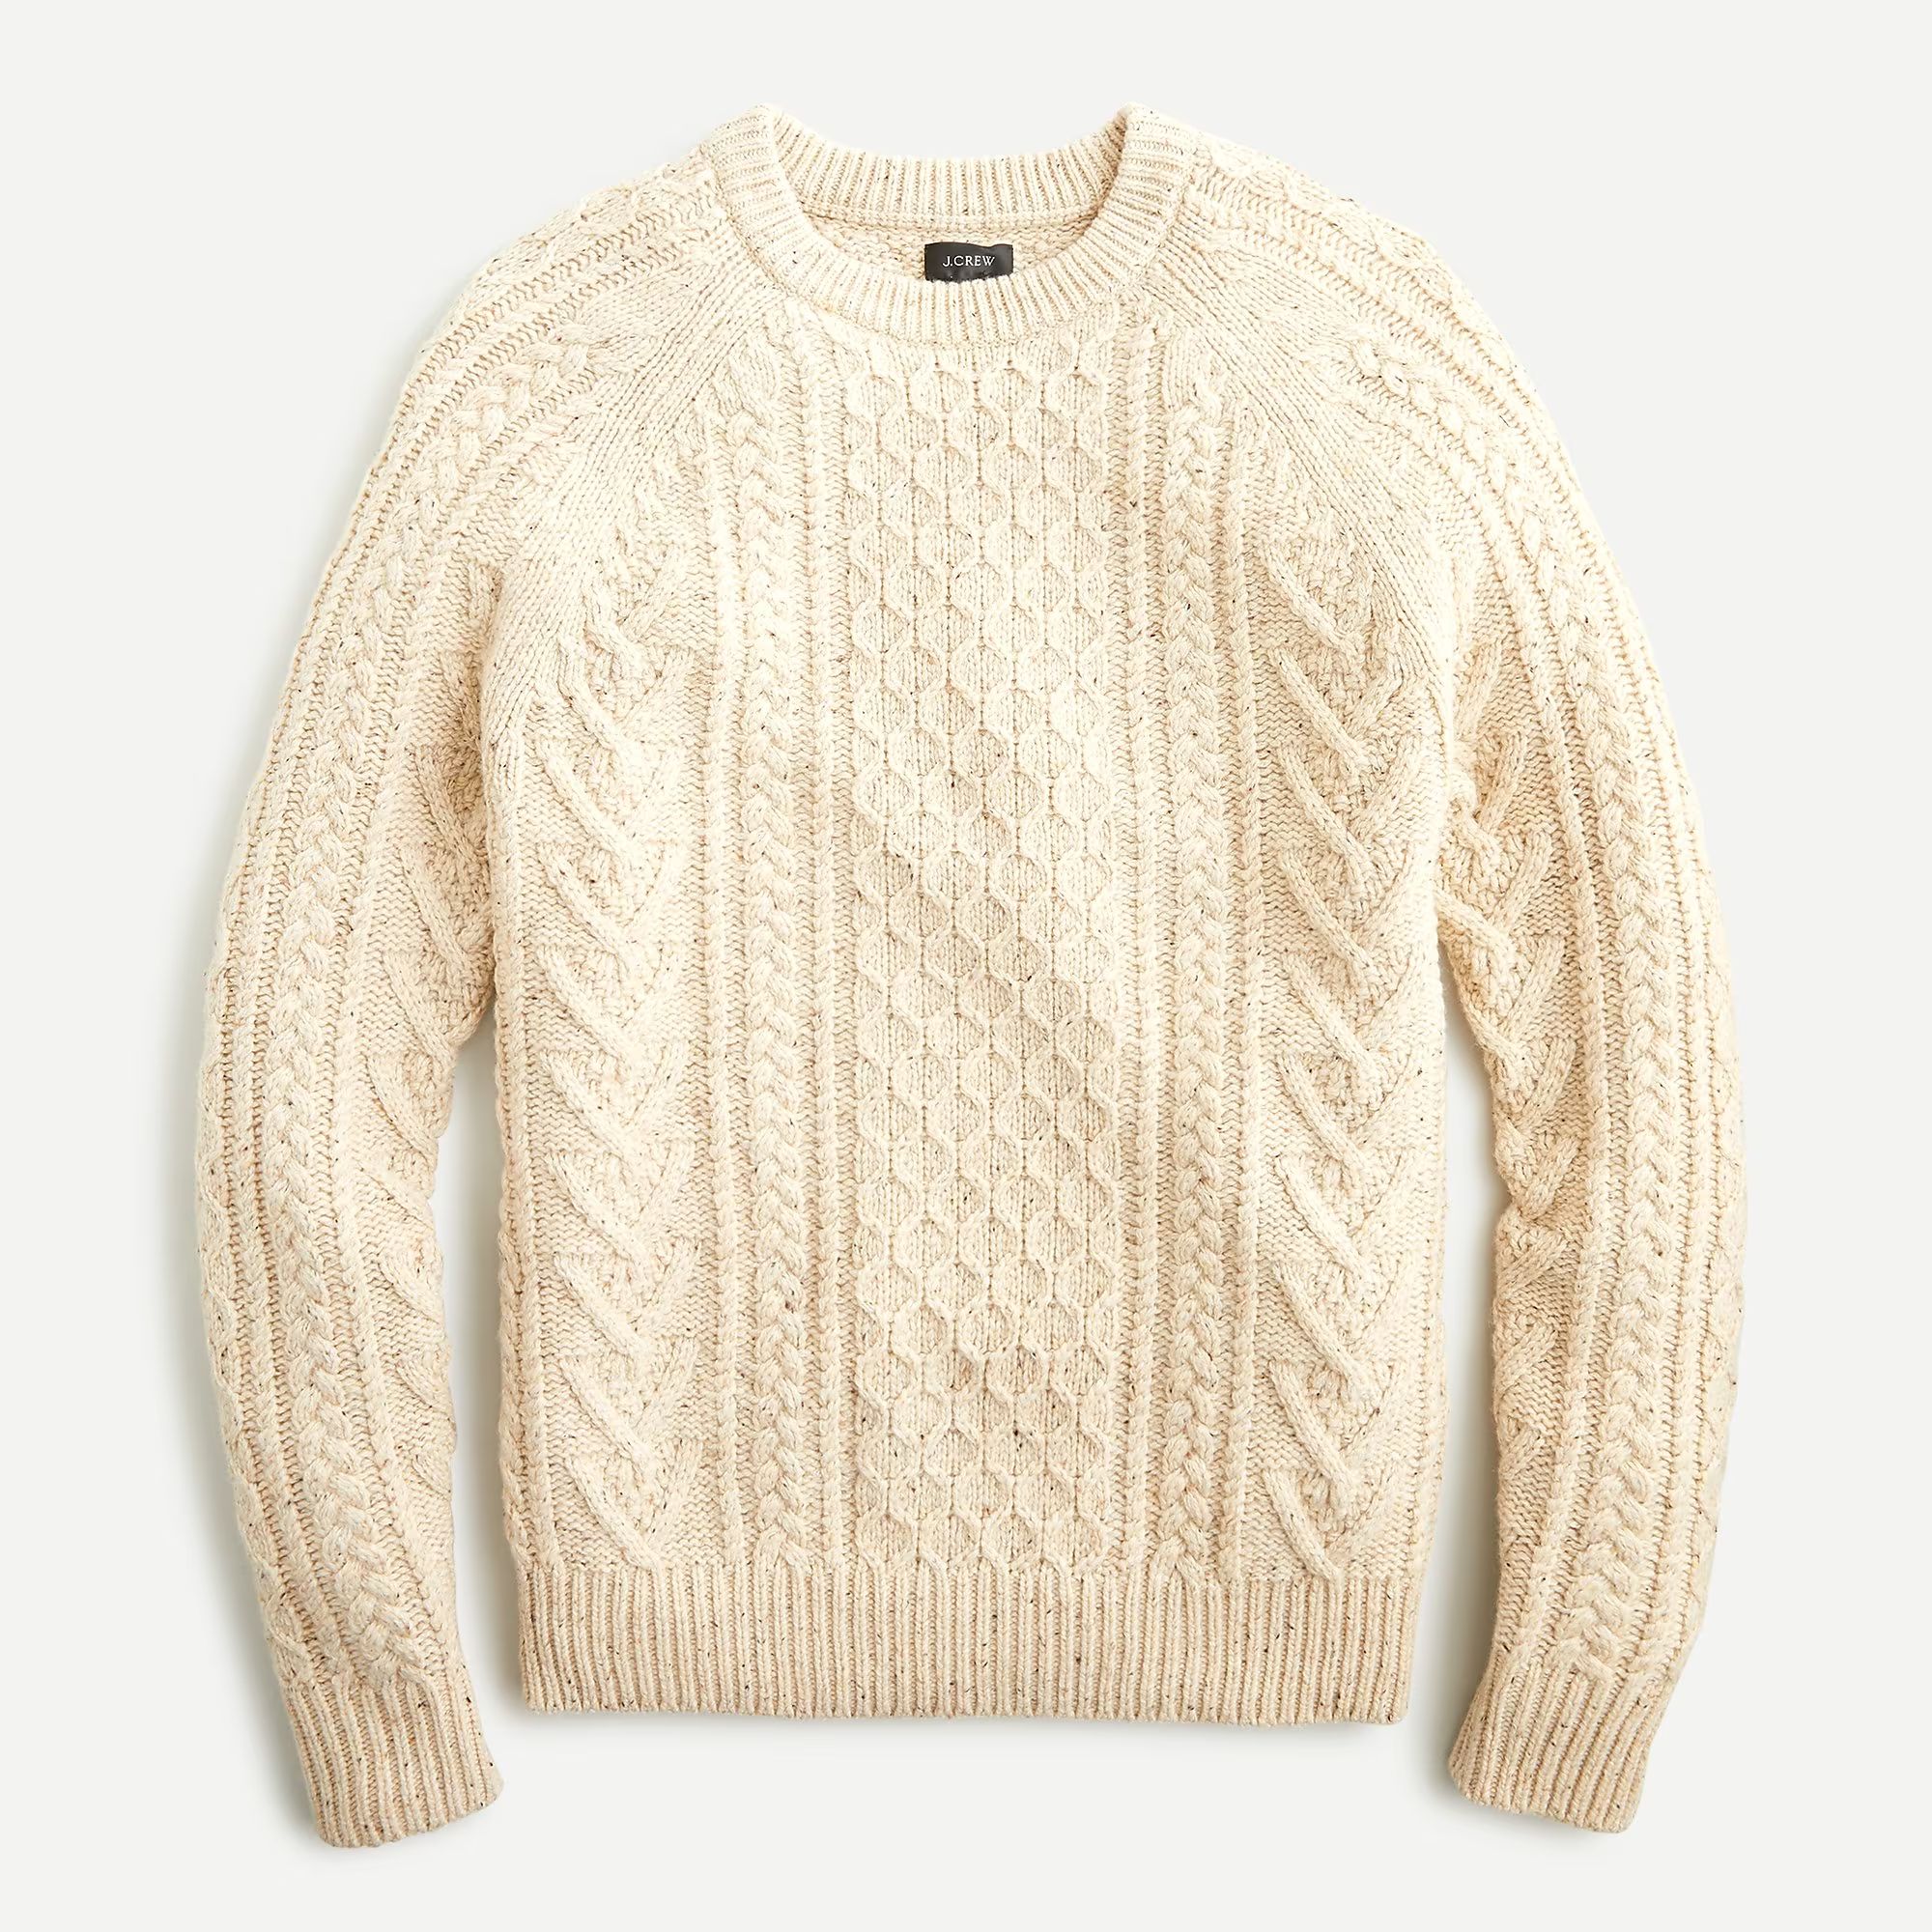 Rugged merino wool-blend donegal cable-knit crewneck sweater | J.Crew US